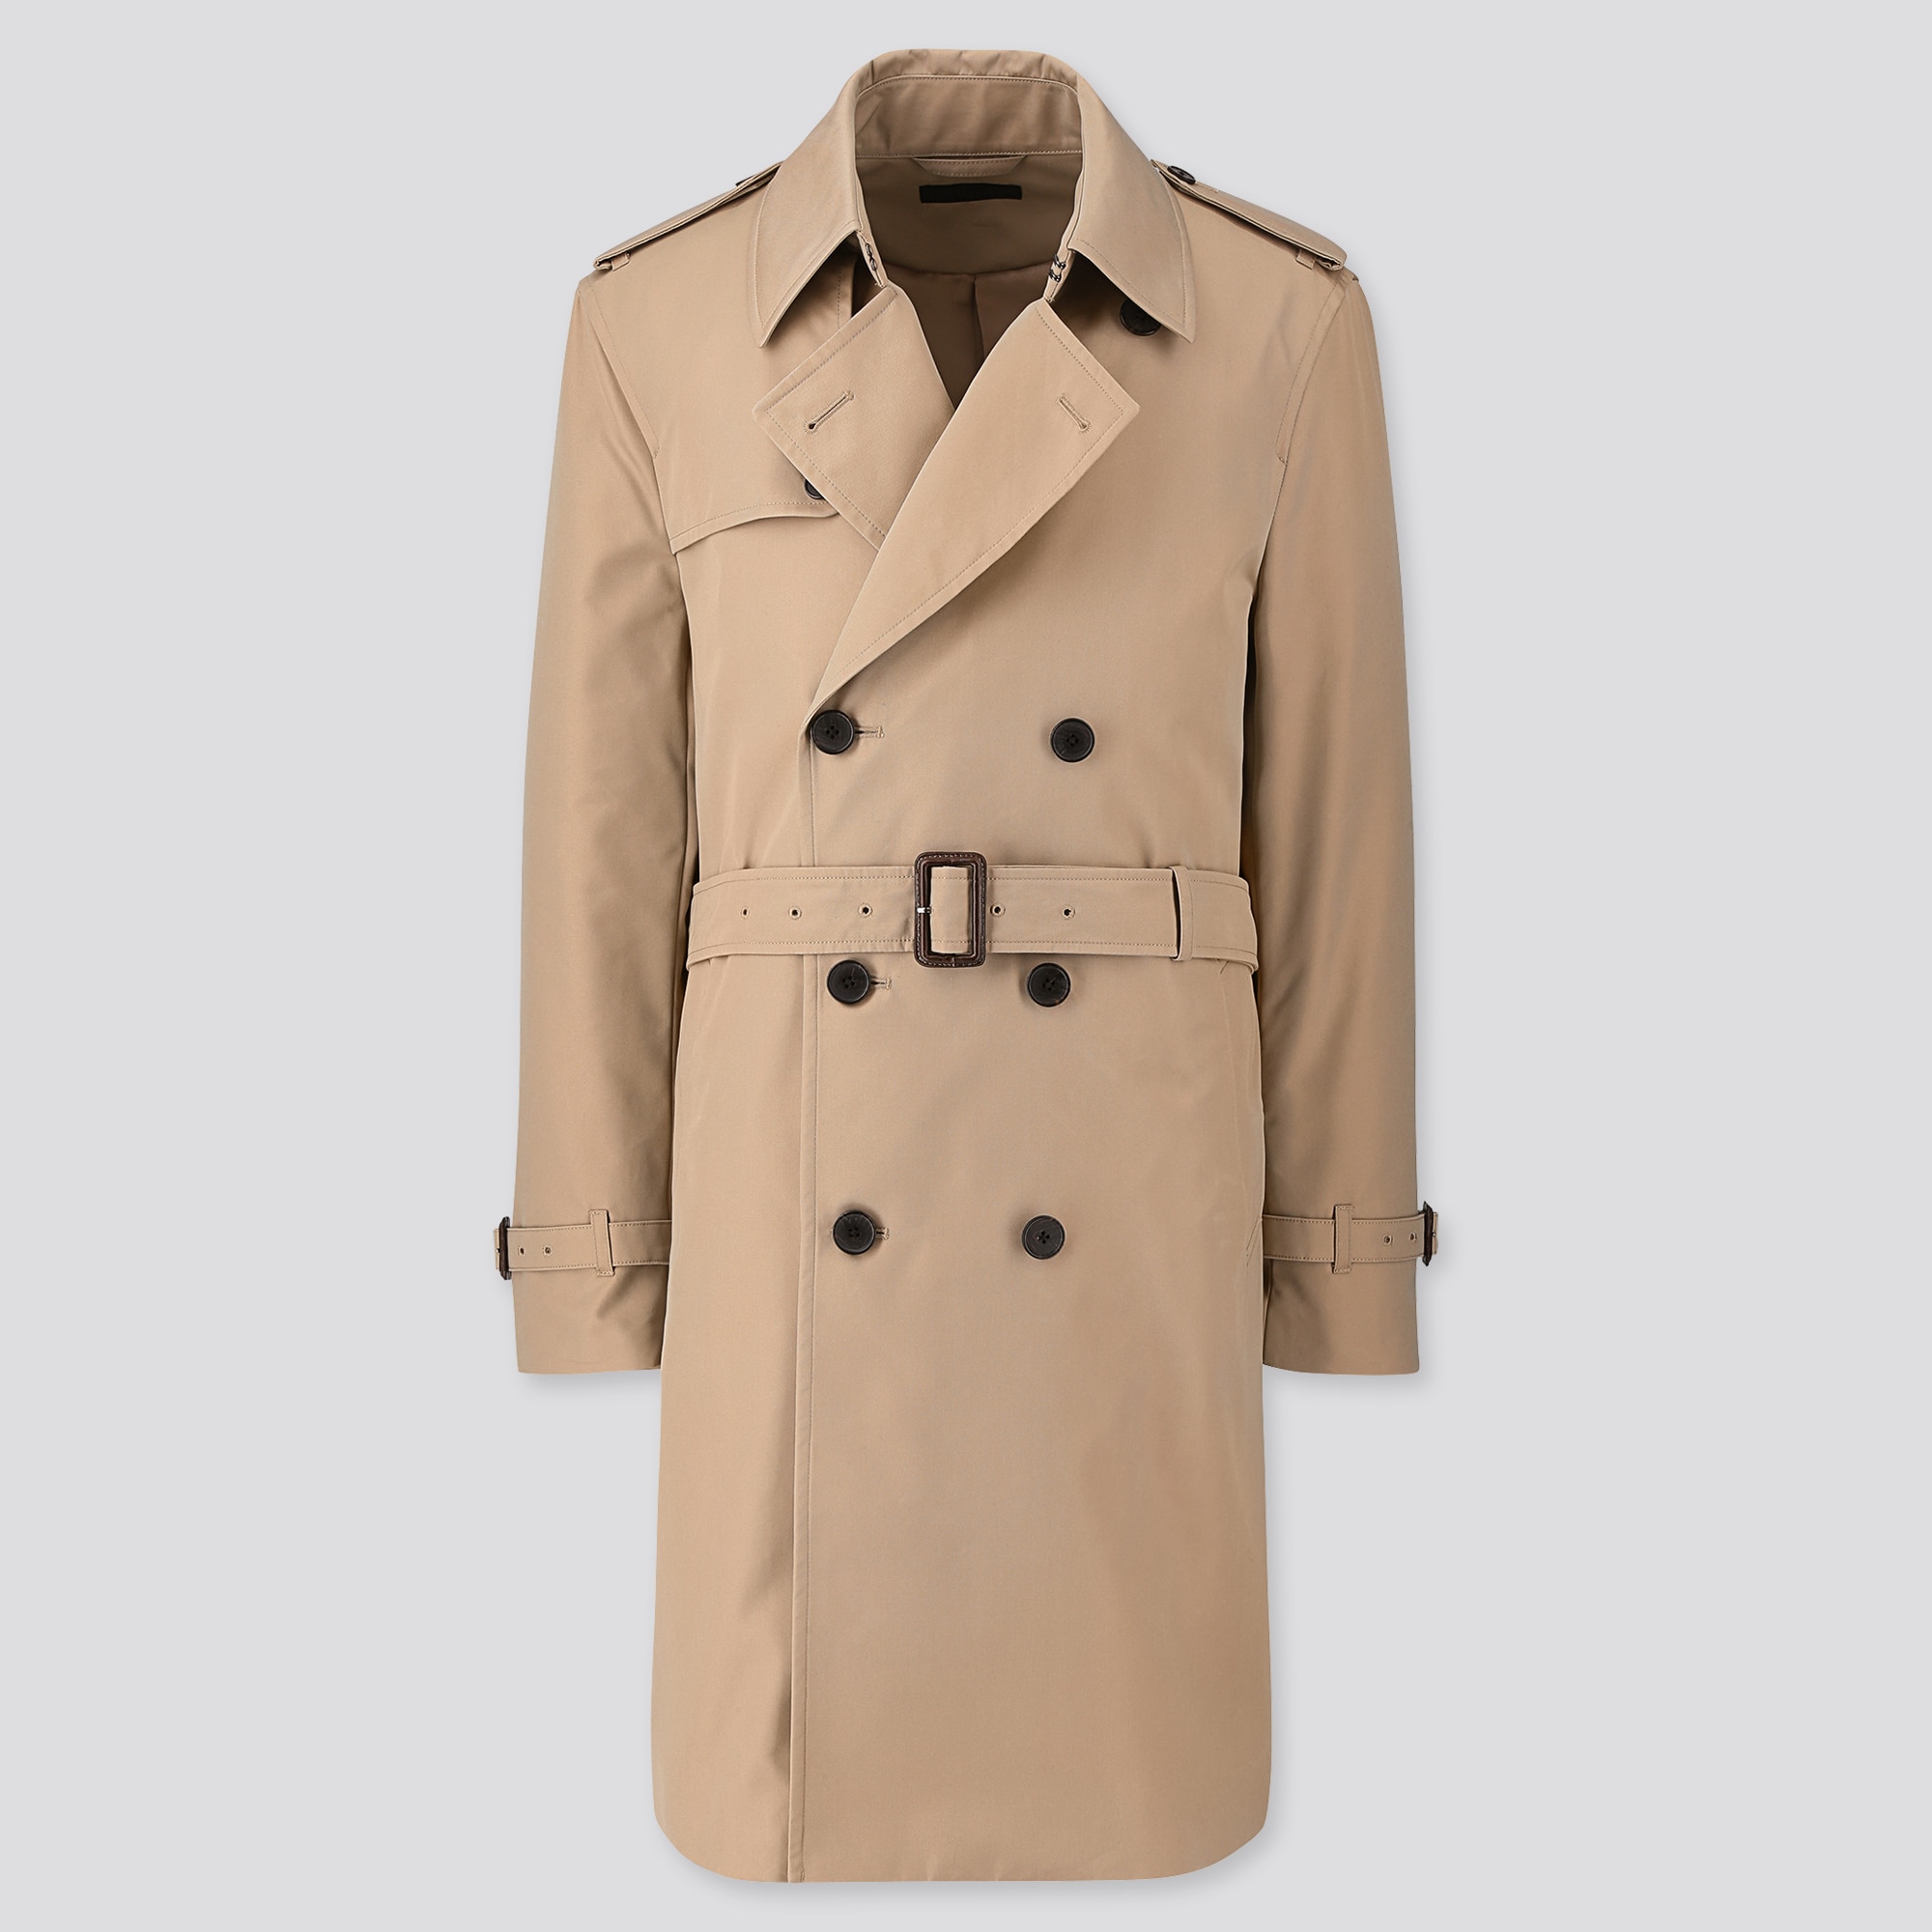 the trench coat